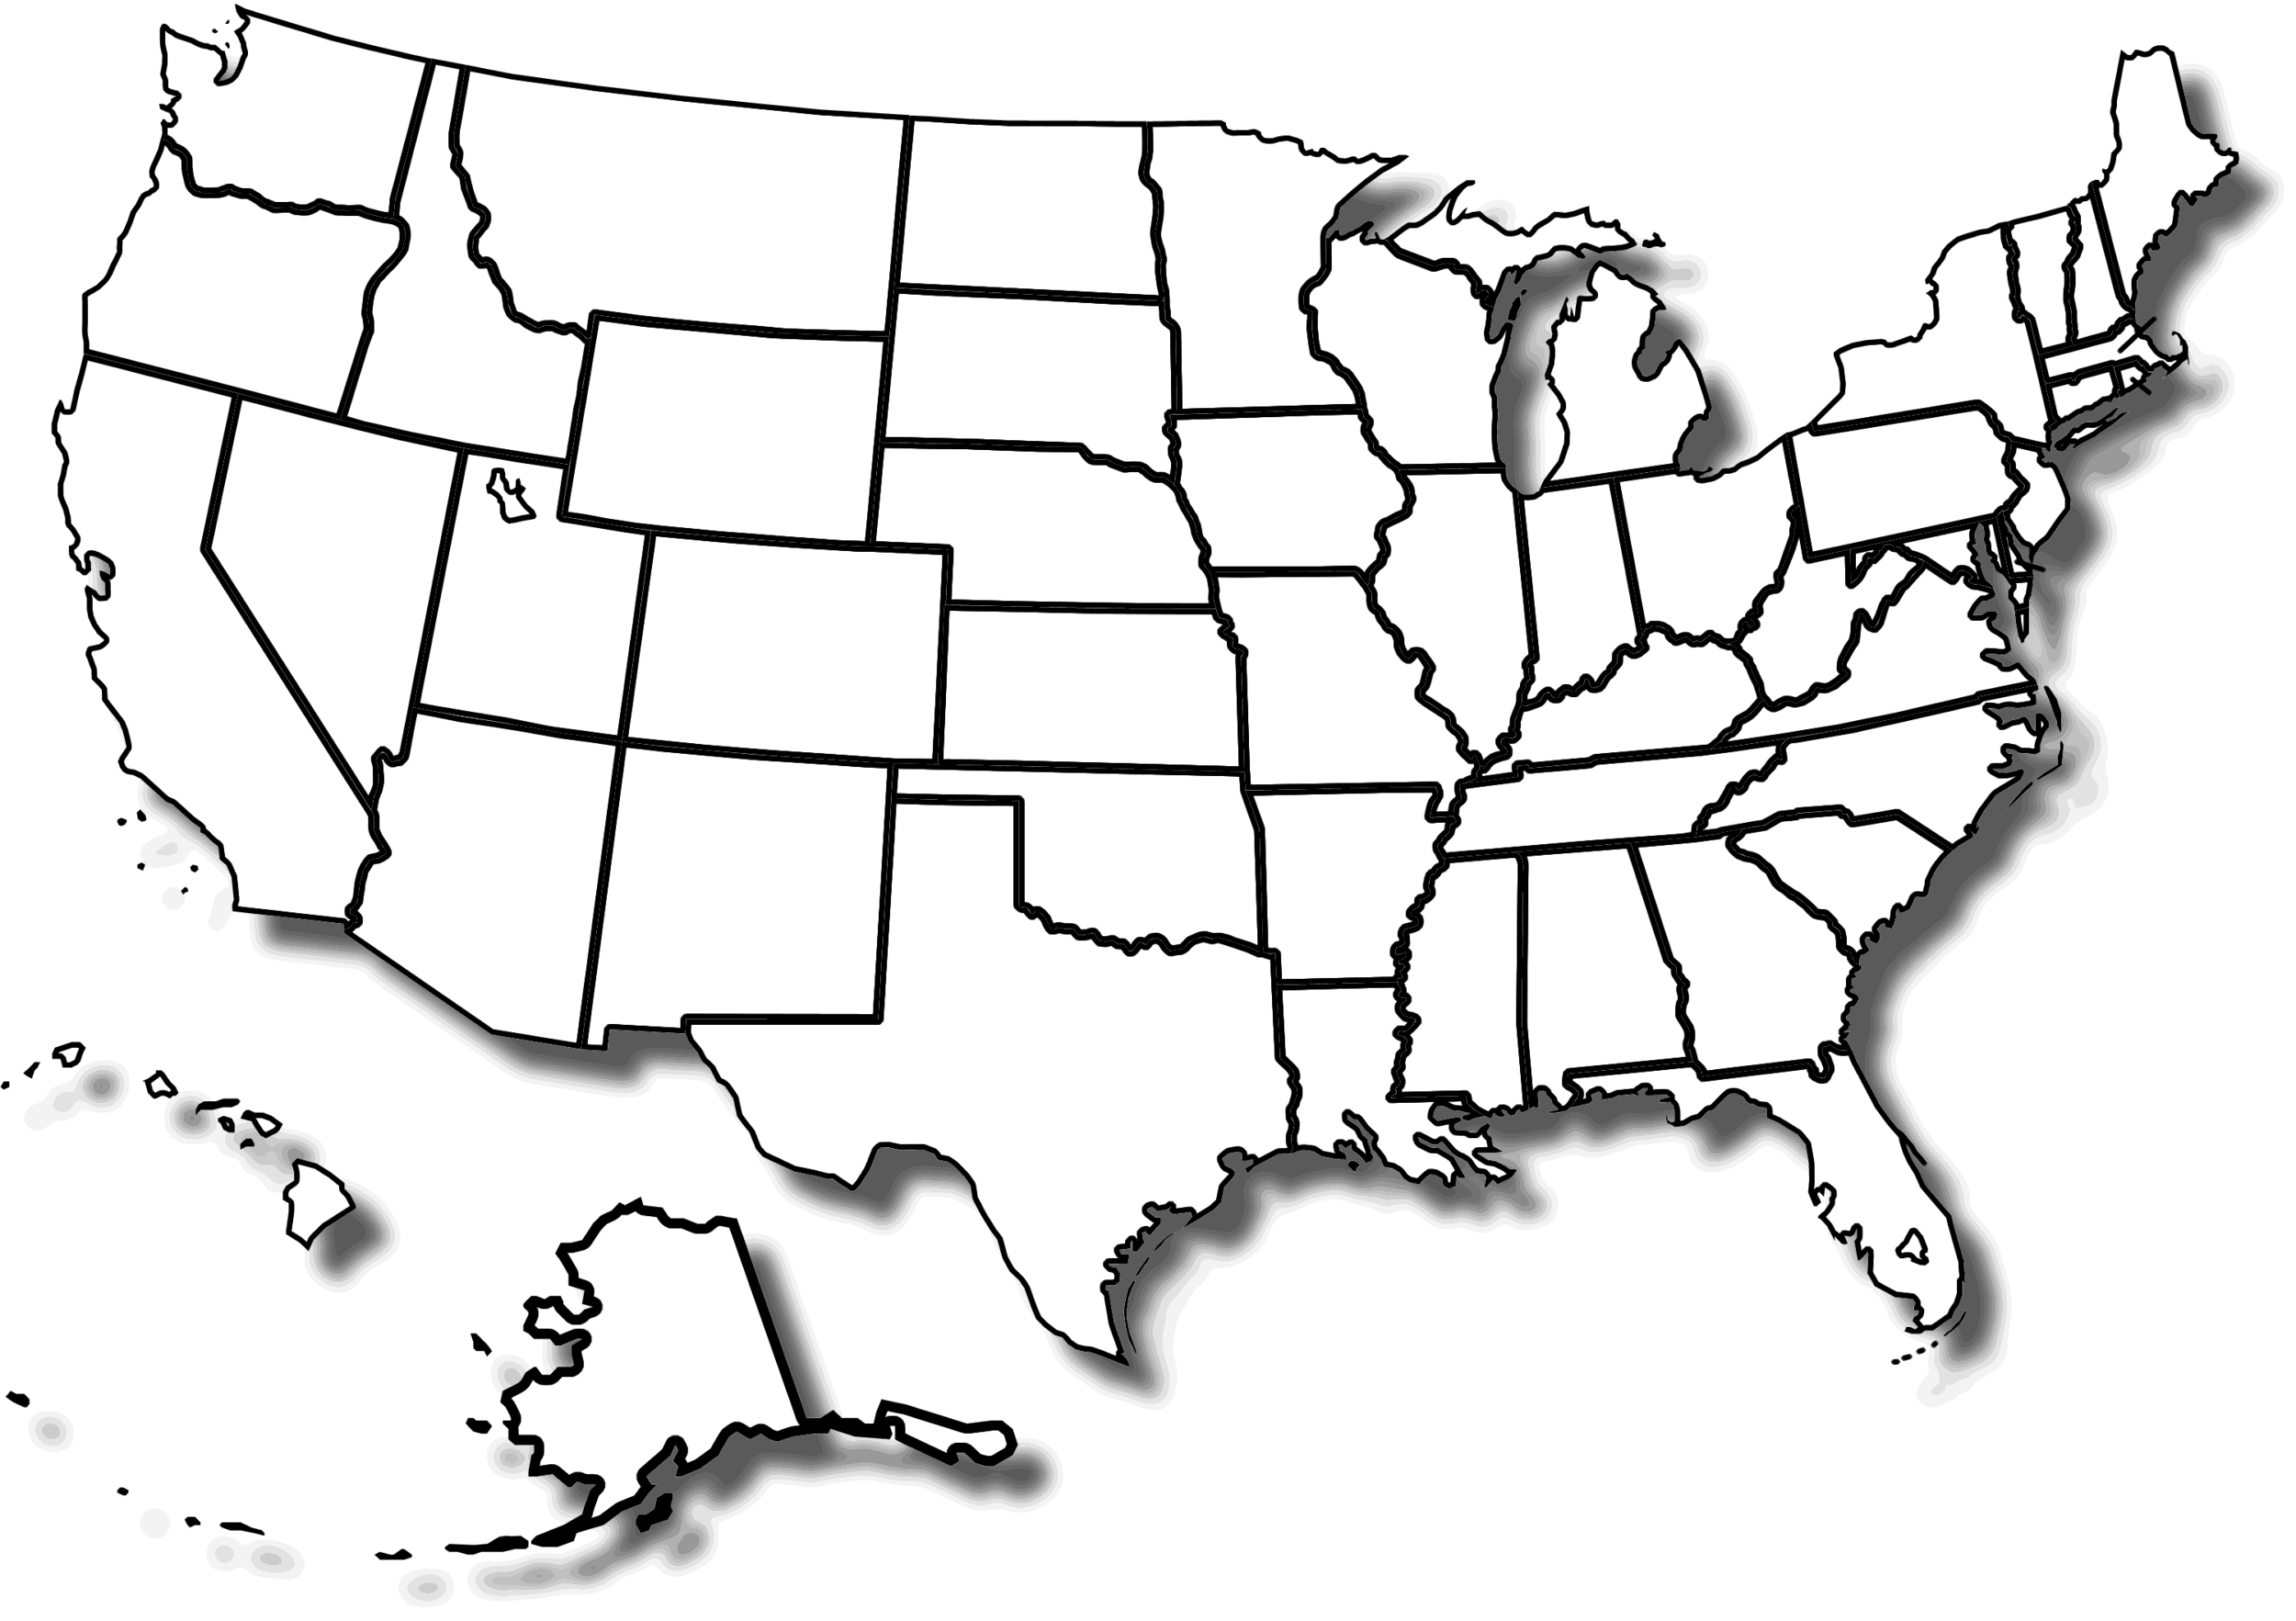 Attractive State Map of the USA